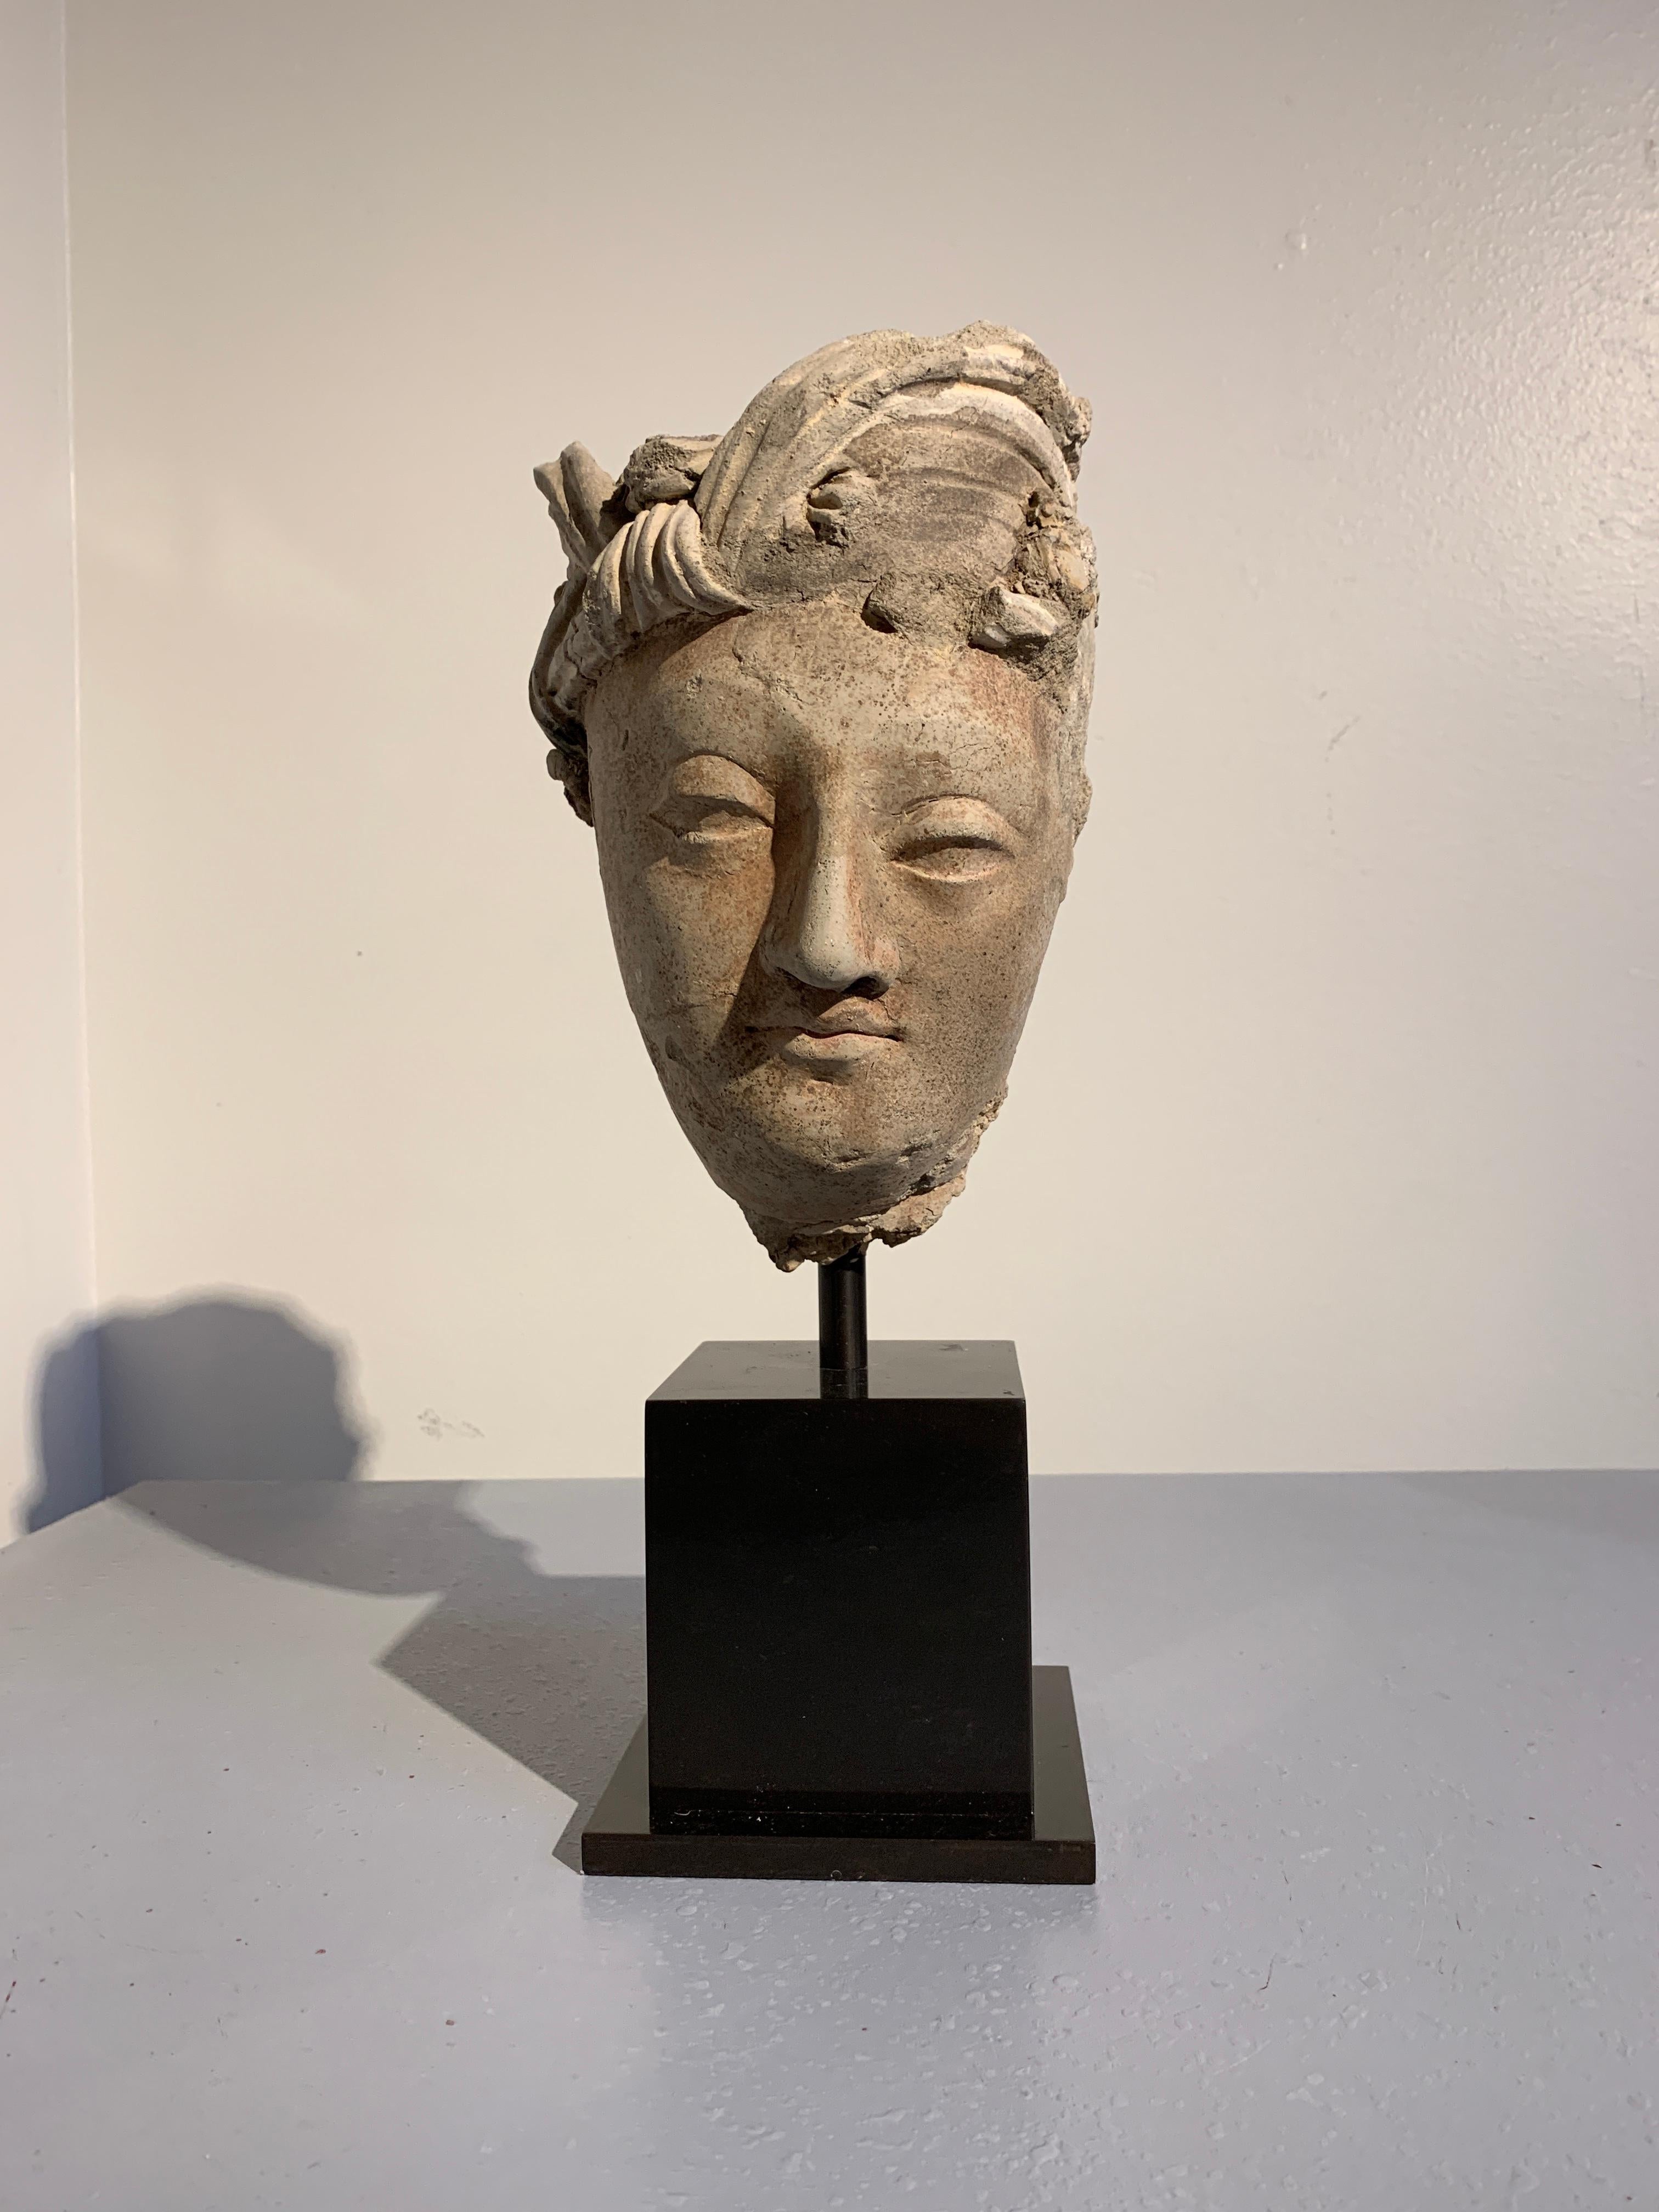 A striking Gandharan molded stucco head of a male Bodhisattva, tentatively identified as Manjushri, ancient region of Gandhara, probably Hadda or surrounding area, 3rd-5th century.

The Bodhisattva is sculpted of stucco in an idealized manner as a